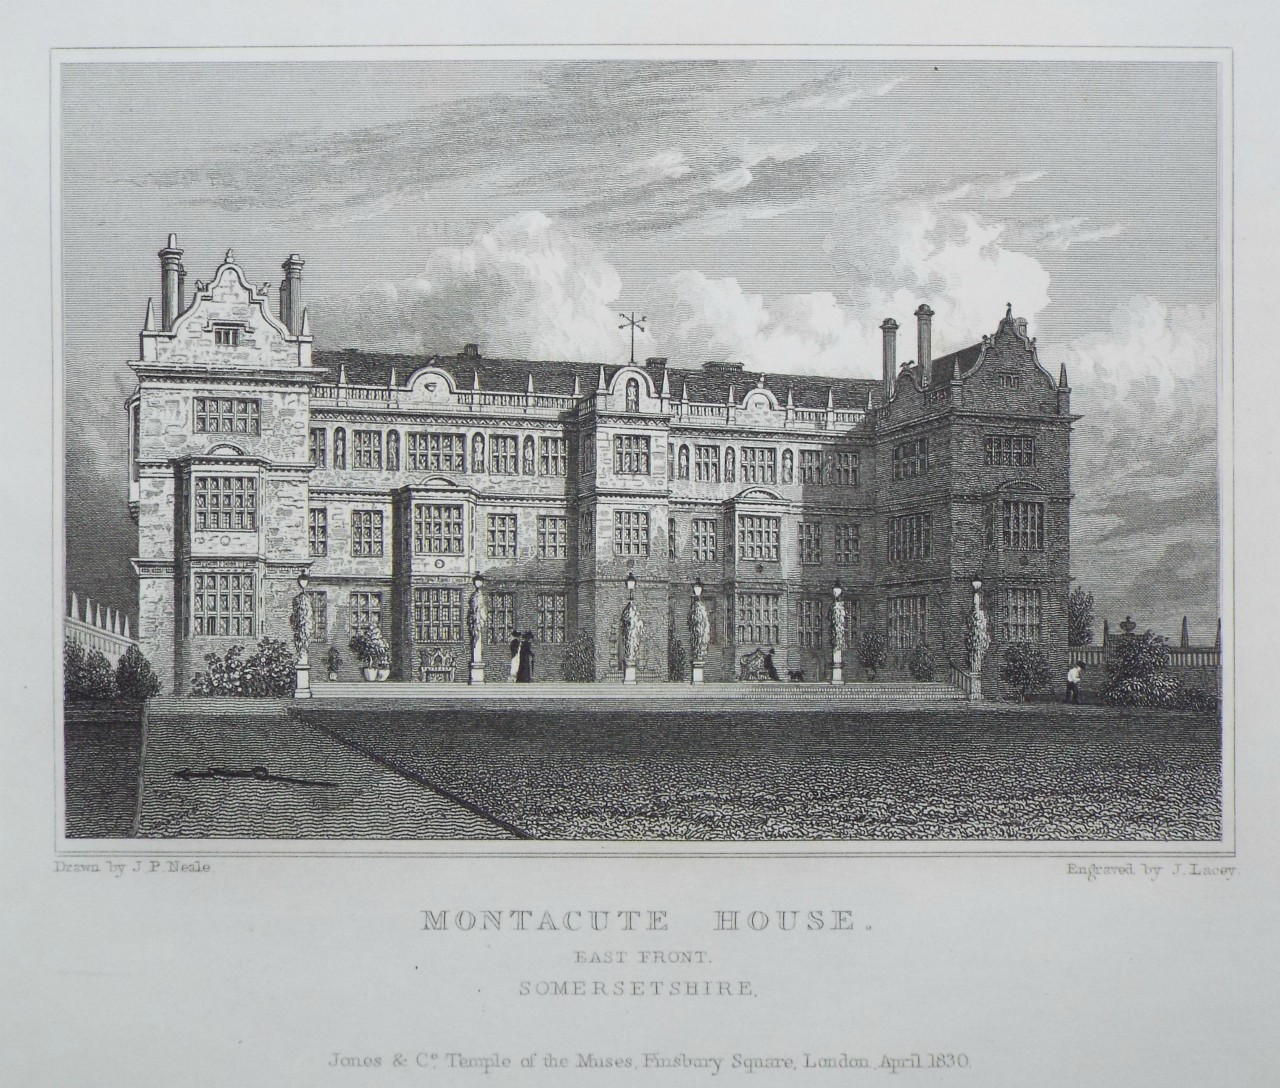 Print - Montacute House. East Front. Somersetshire. - Lacey